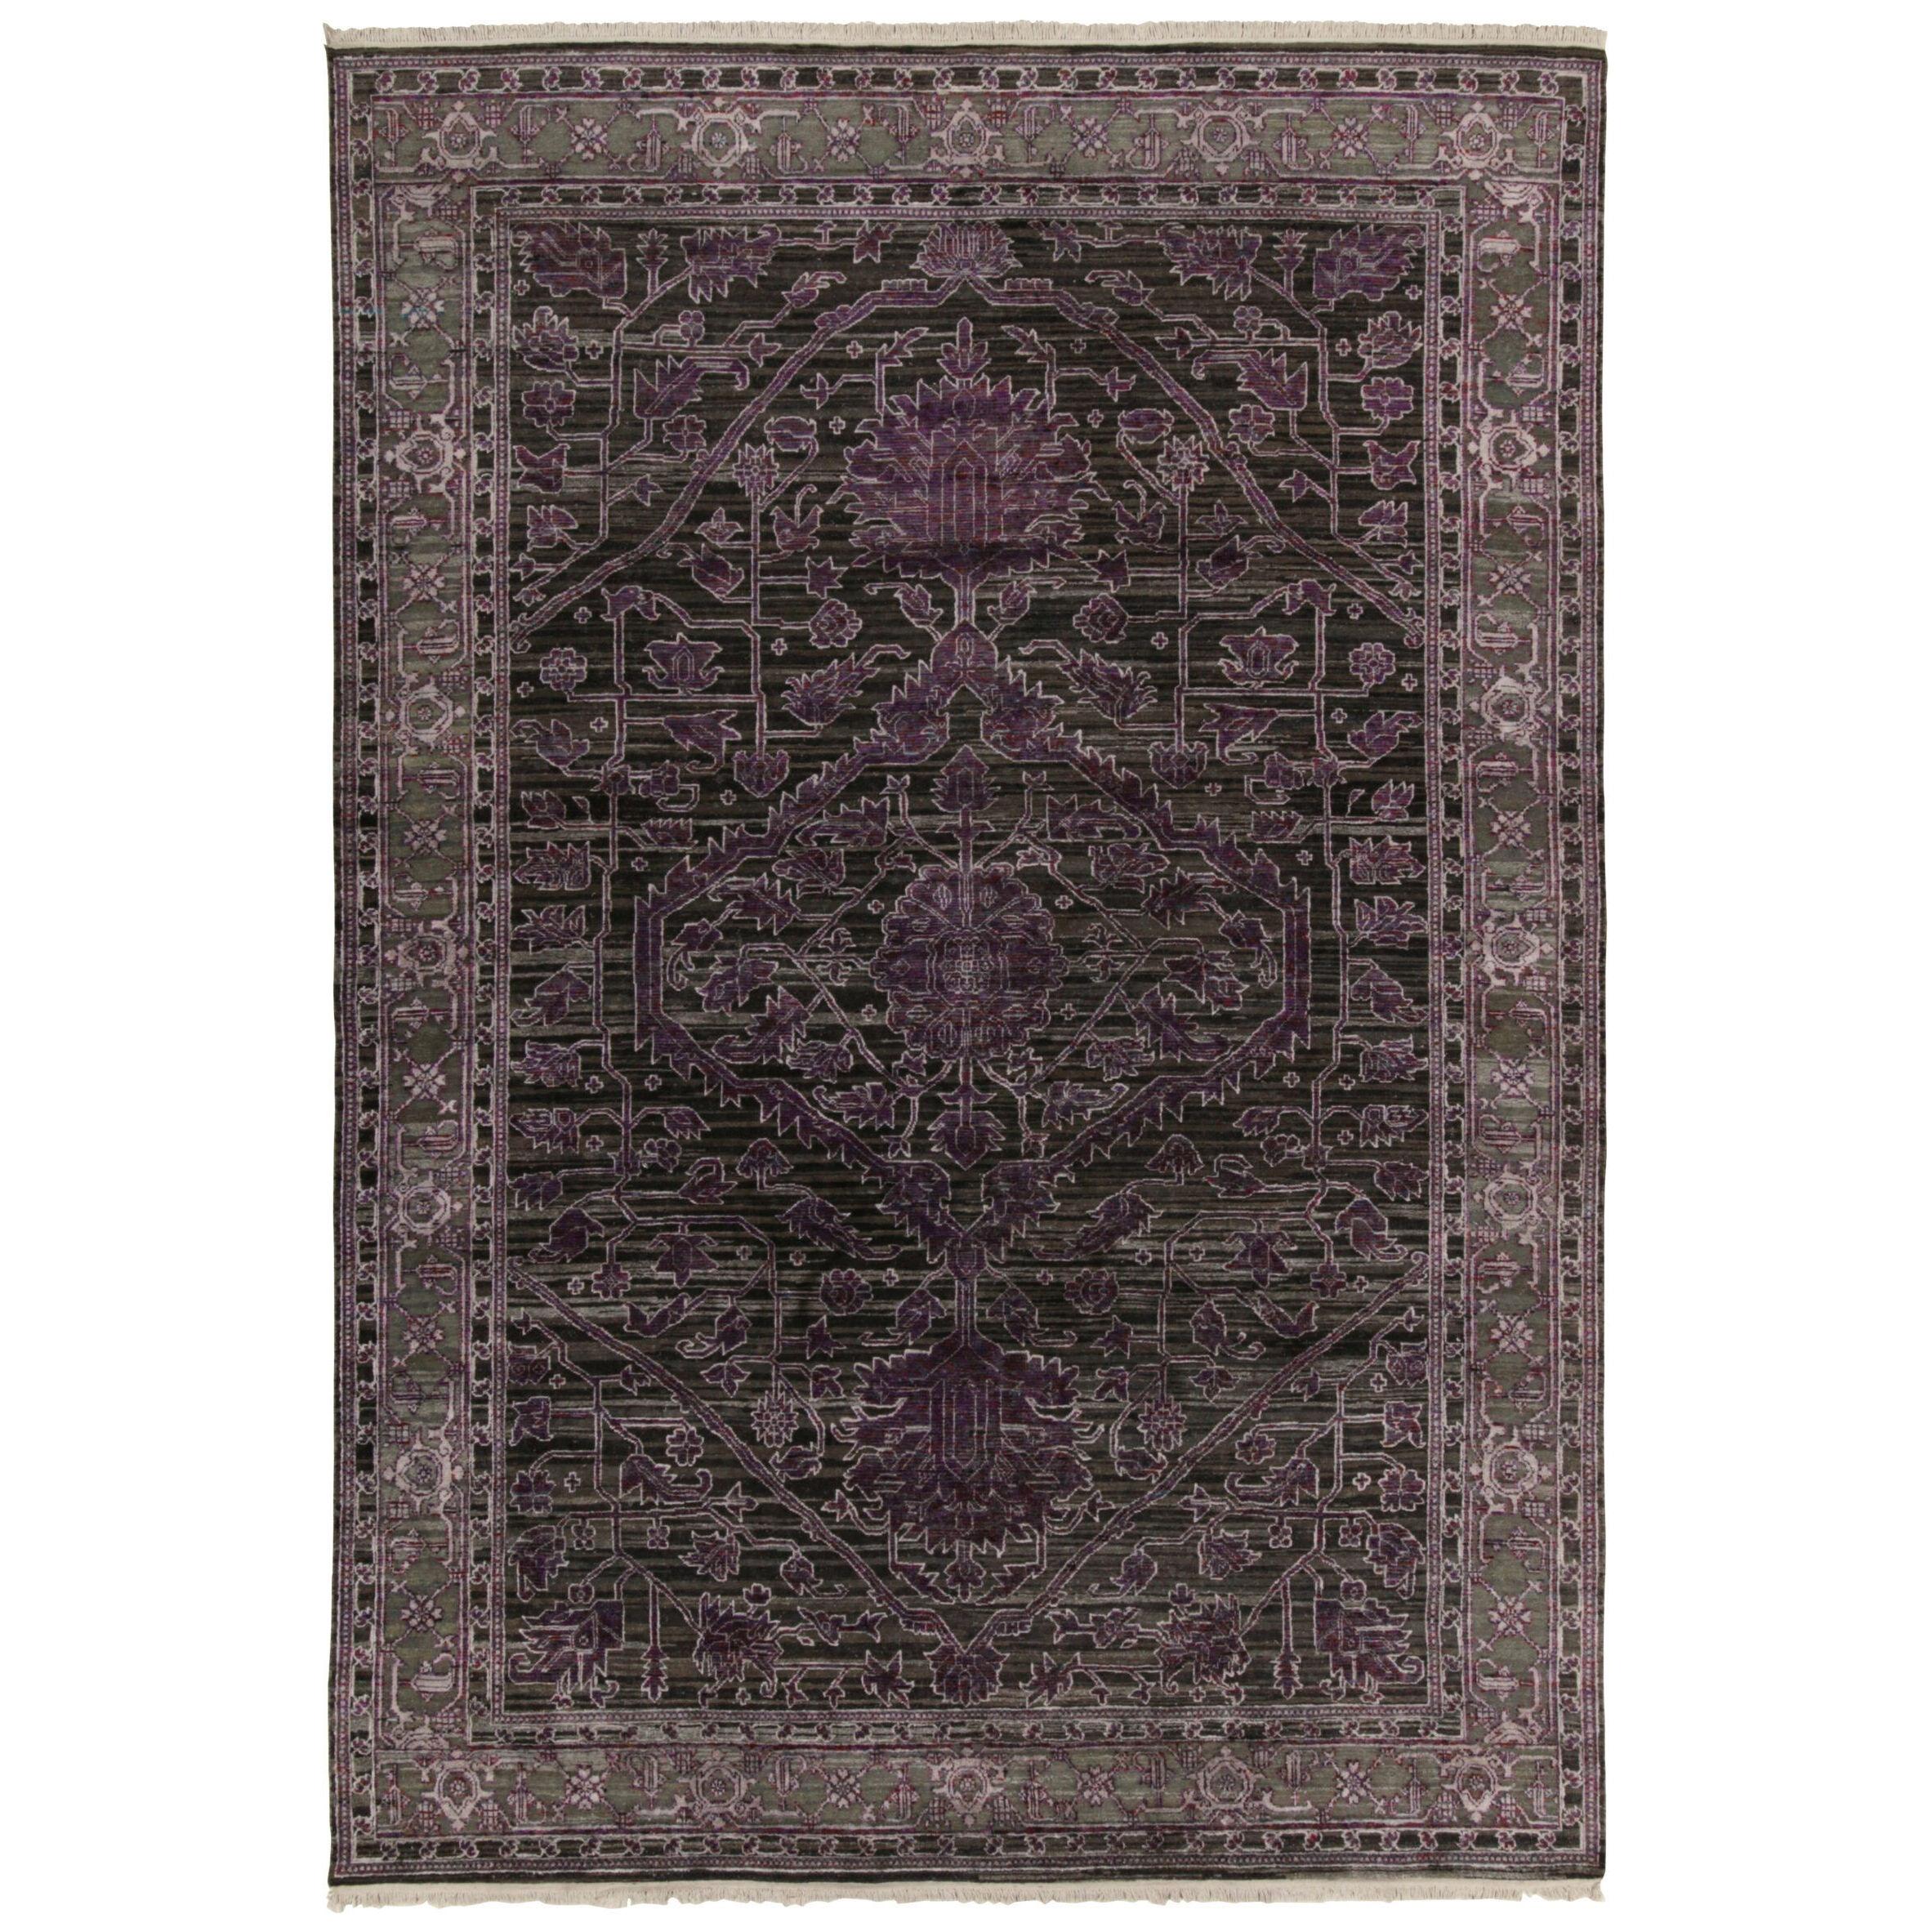 Rug & Kilim’s Classic Style Rug in Purple Geometric-Floral Patterns